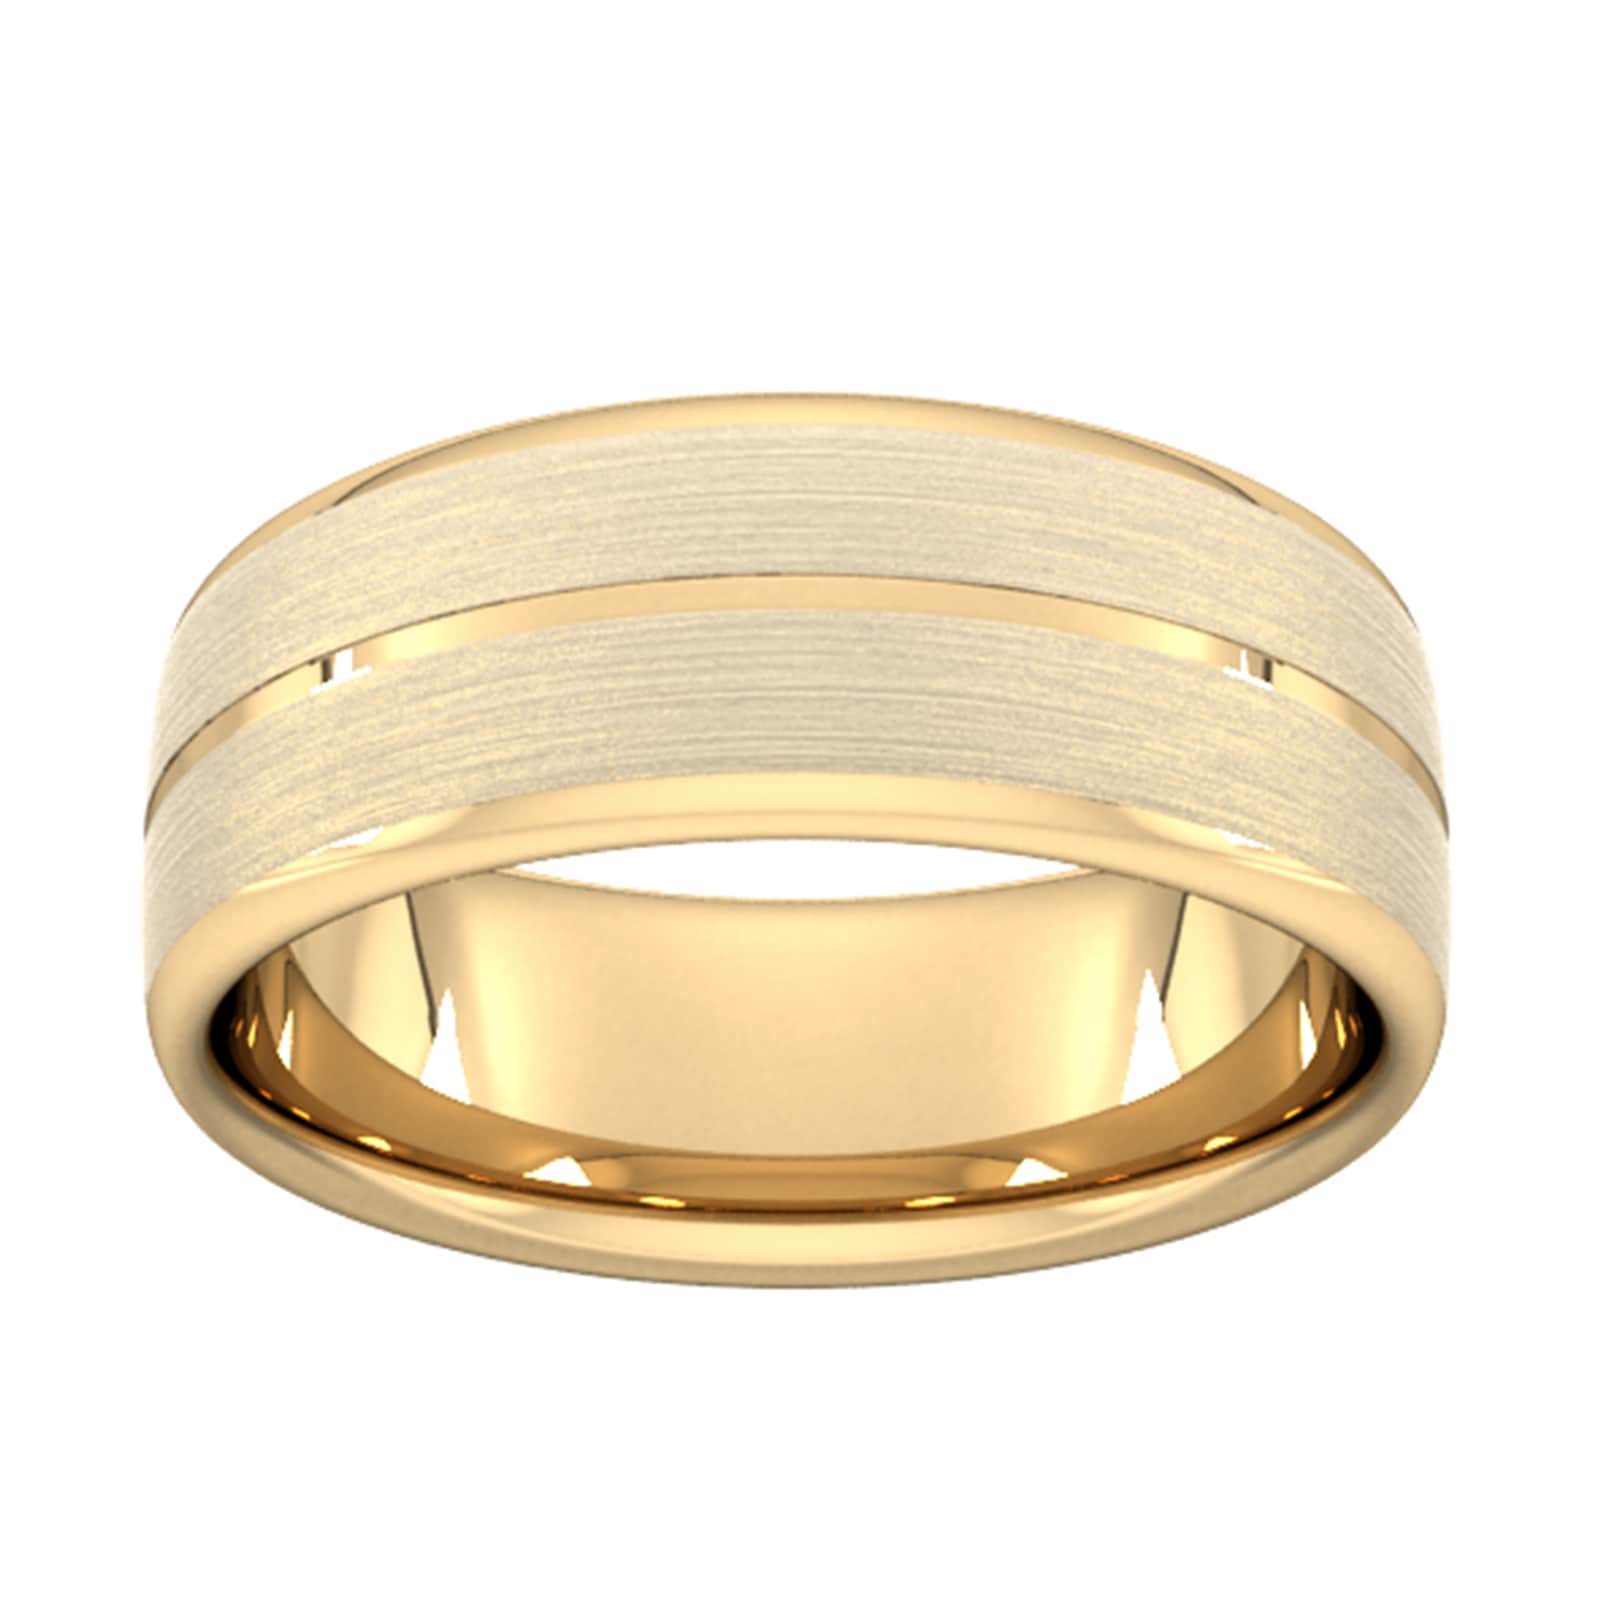 8mm Slight Court Extra Heavy Centre Groove With Chamfered Edge Wedding Ring In 9 Carat Yellow Gold - Ring Size L